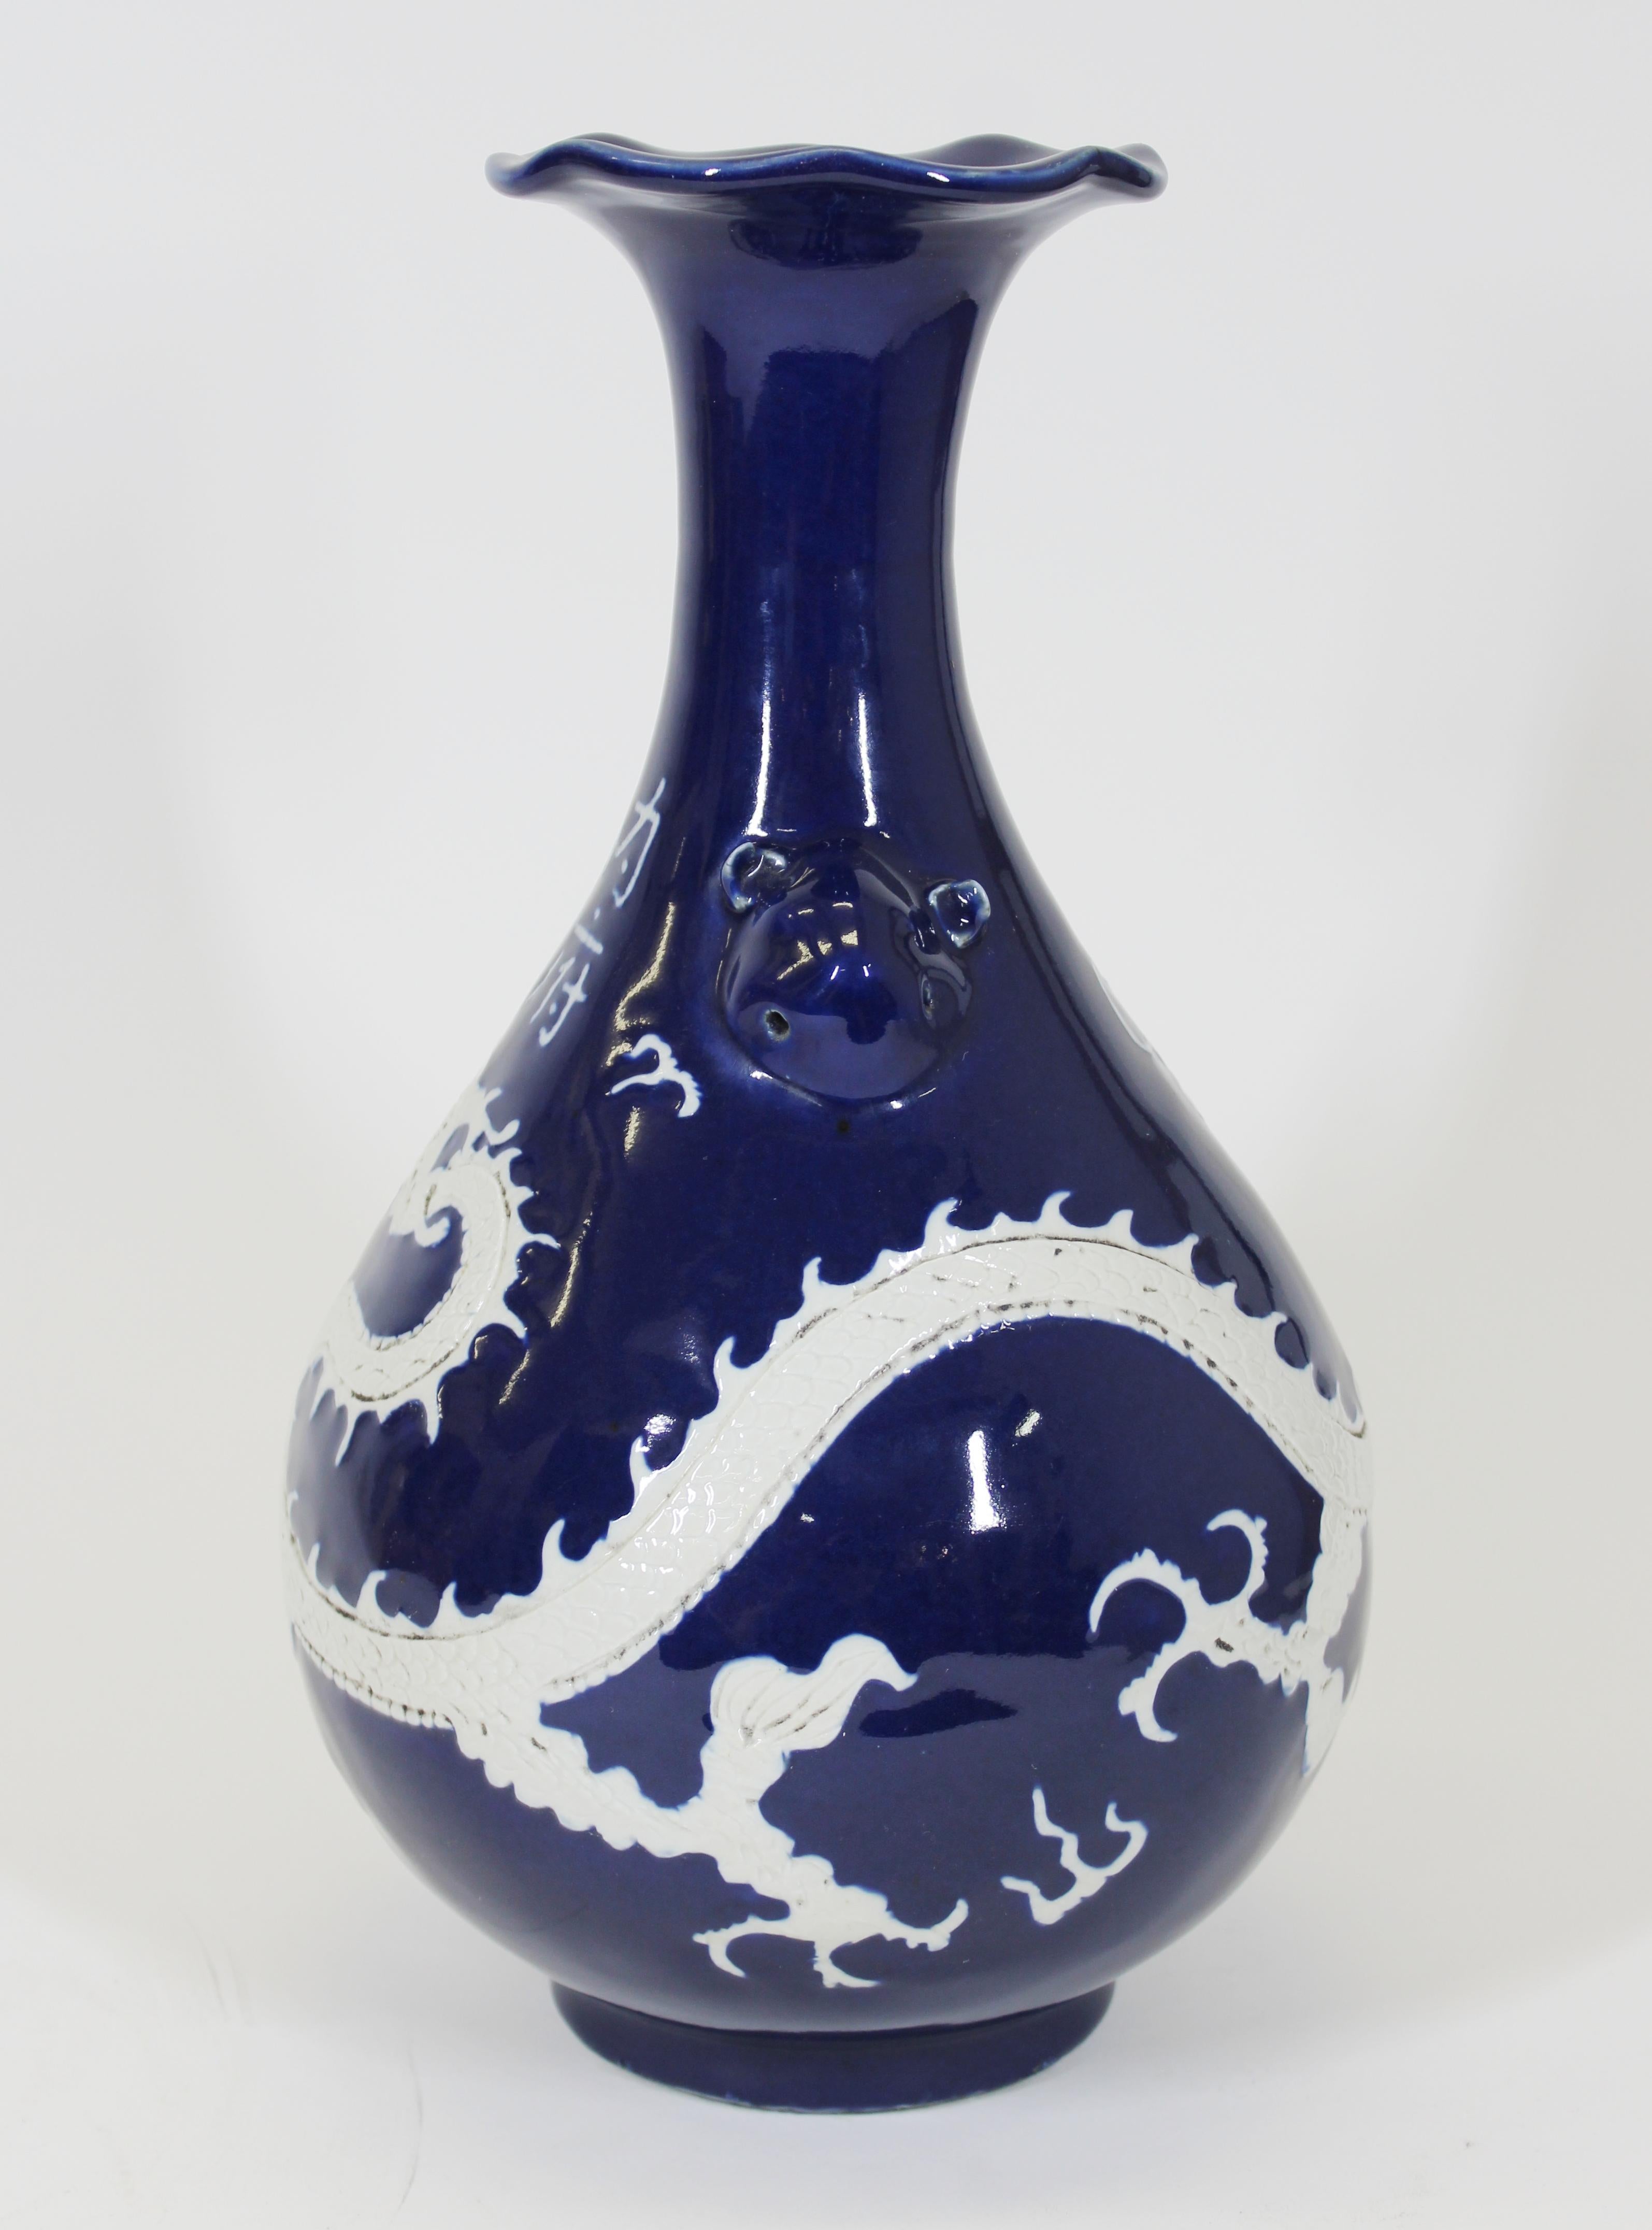 Chinese Qing dynasty baluster shape porcelain vase with rich cobalt blue glaze featuring a white dragon in high relief circling the vase. With stylized handles and a tulip opening. The Chinese characters on the front spell 'Imperial'. Made in China